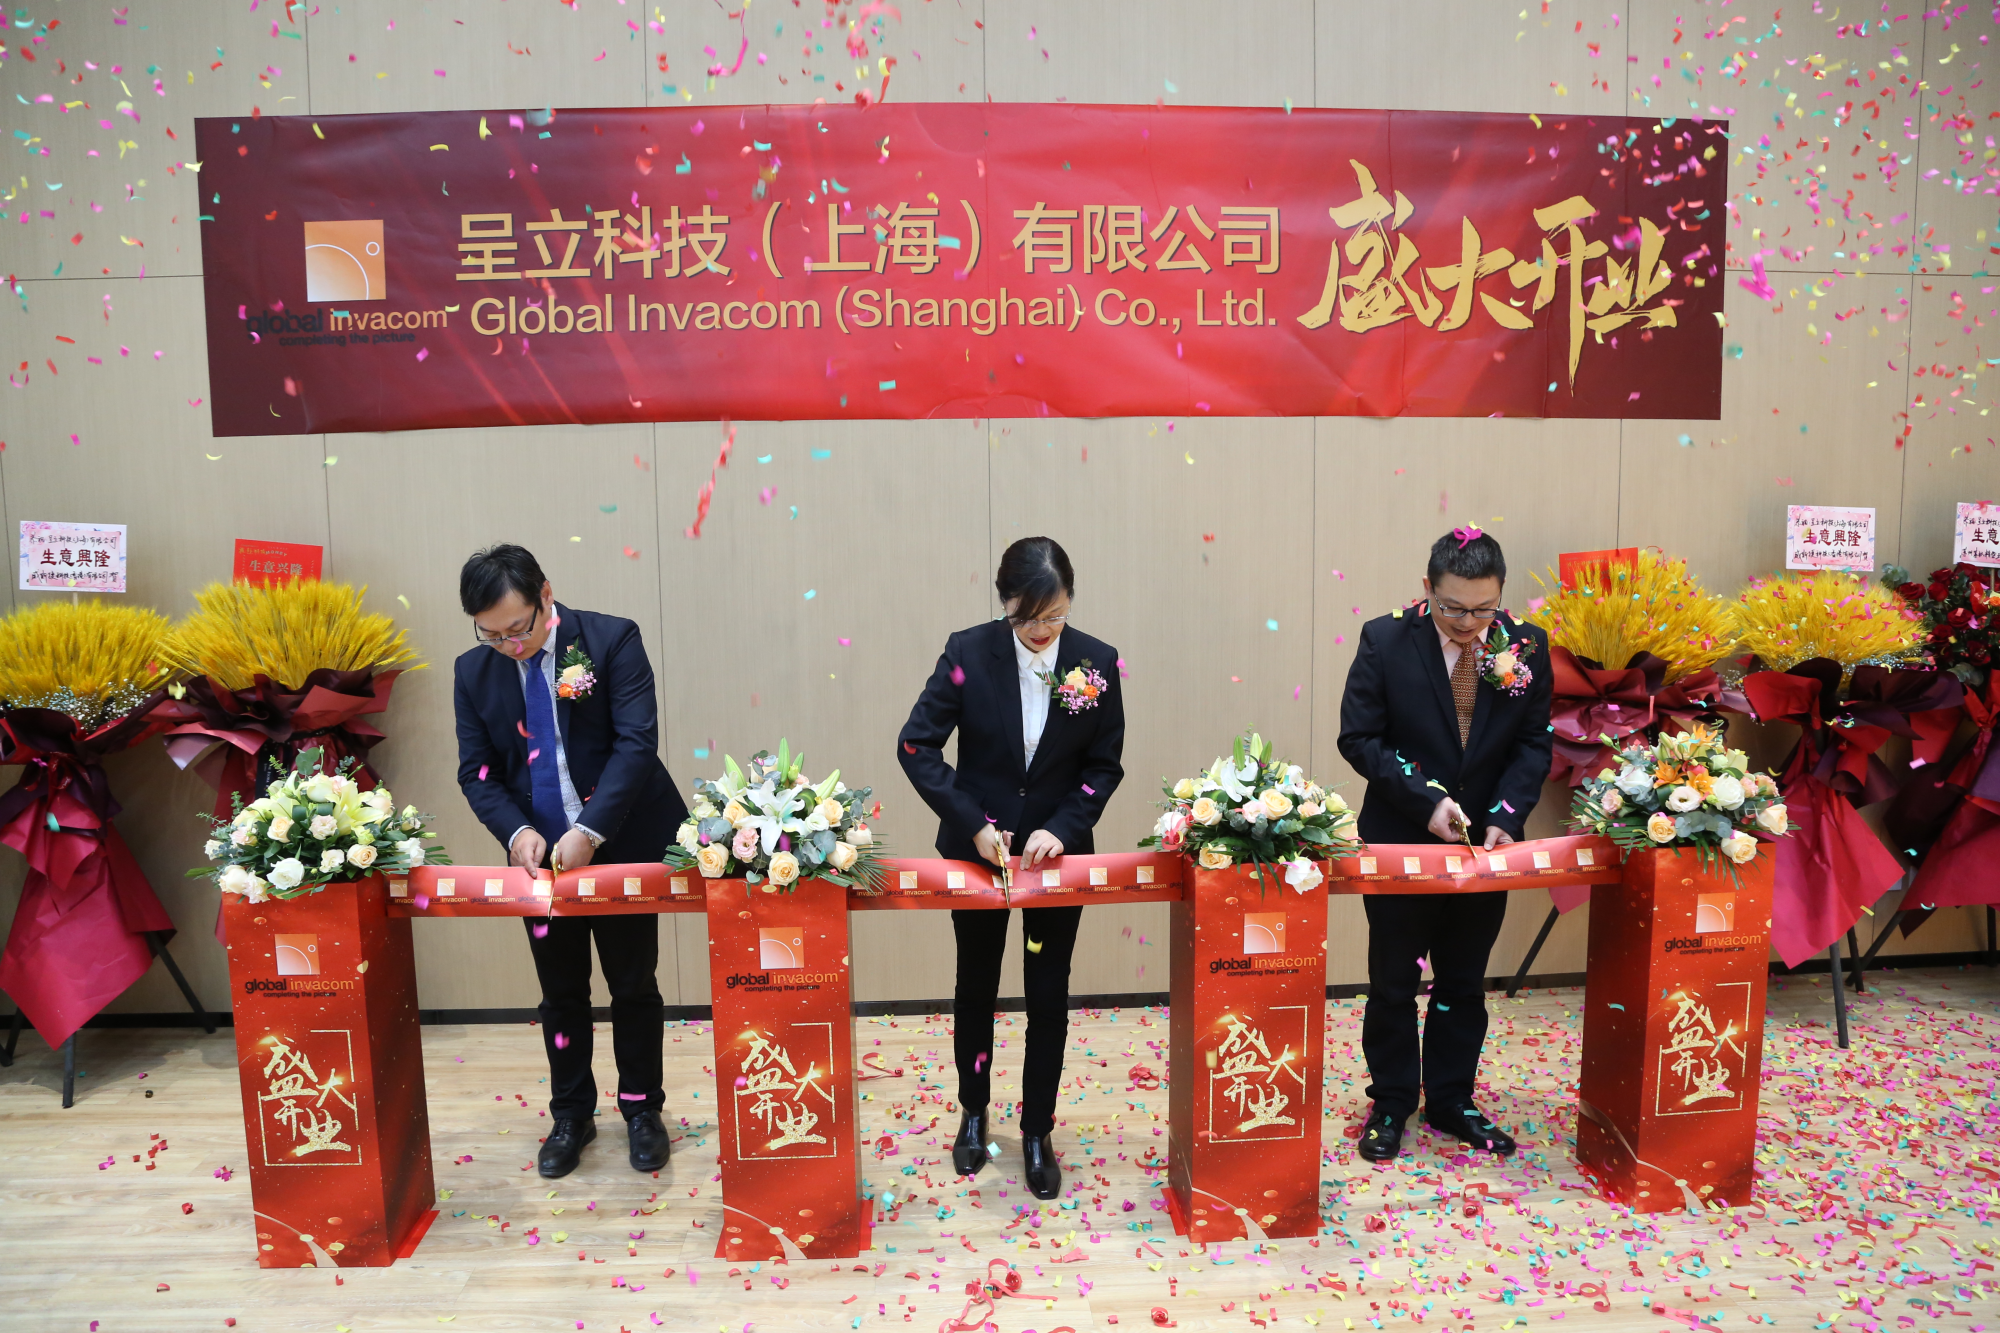 Global Invacom (Shanghai) Co., Ltd incorporated in China and opens new location for Global Invacom Group